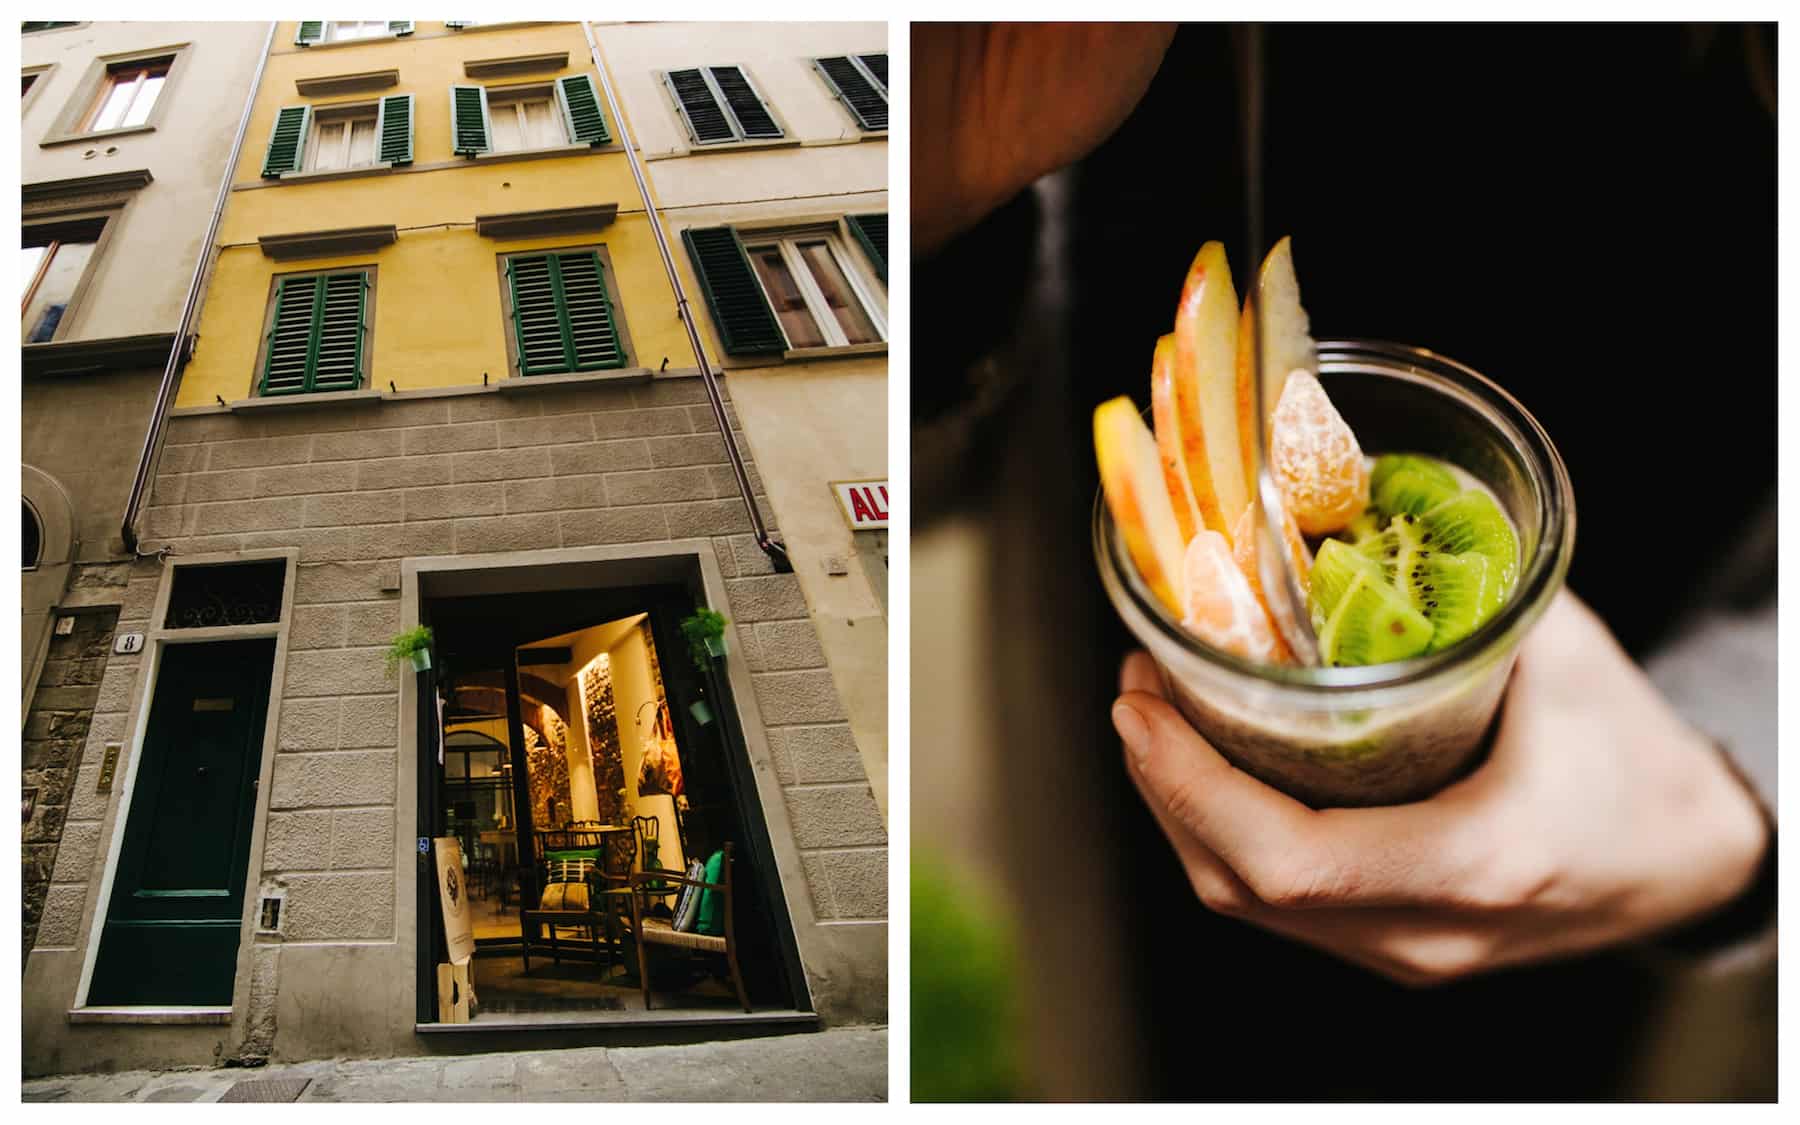 Carduccio vegetarian restaurant in Florence is one of the best for its fresh, organic and biodynamic produce.